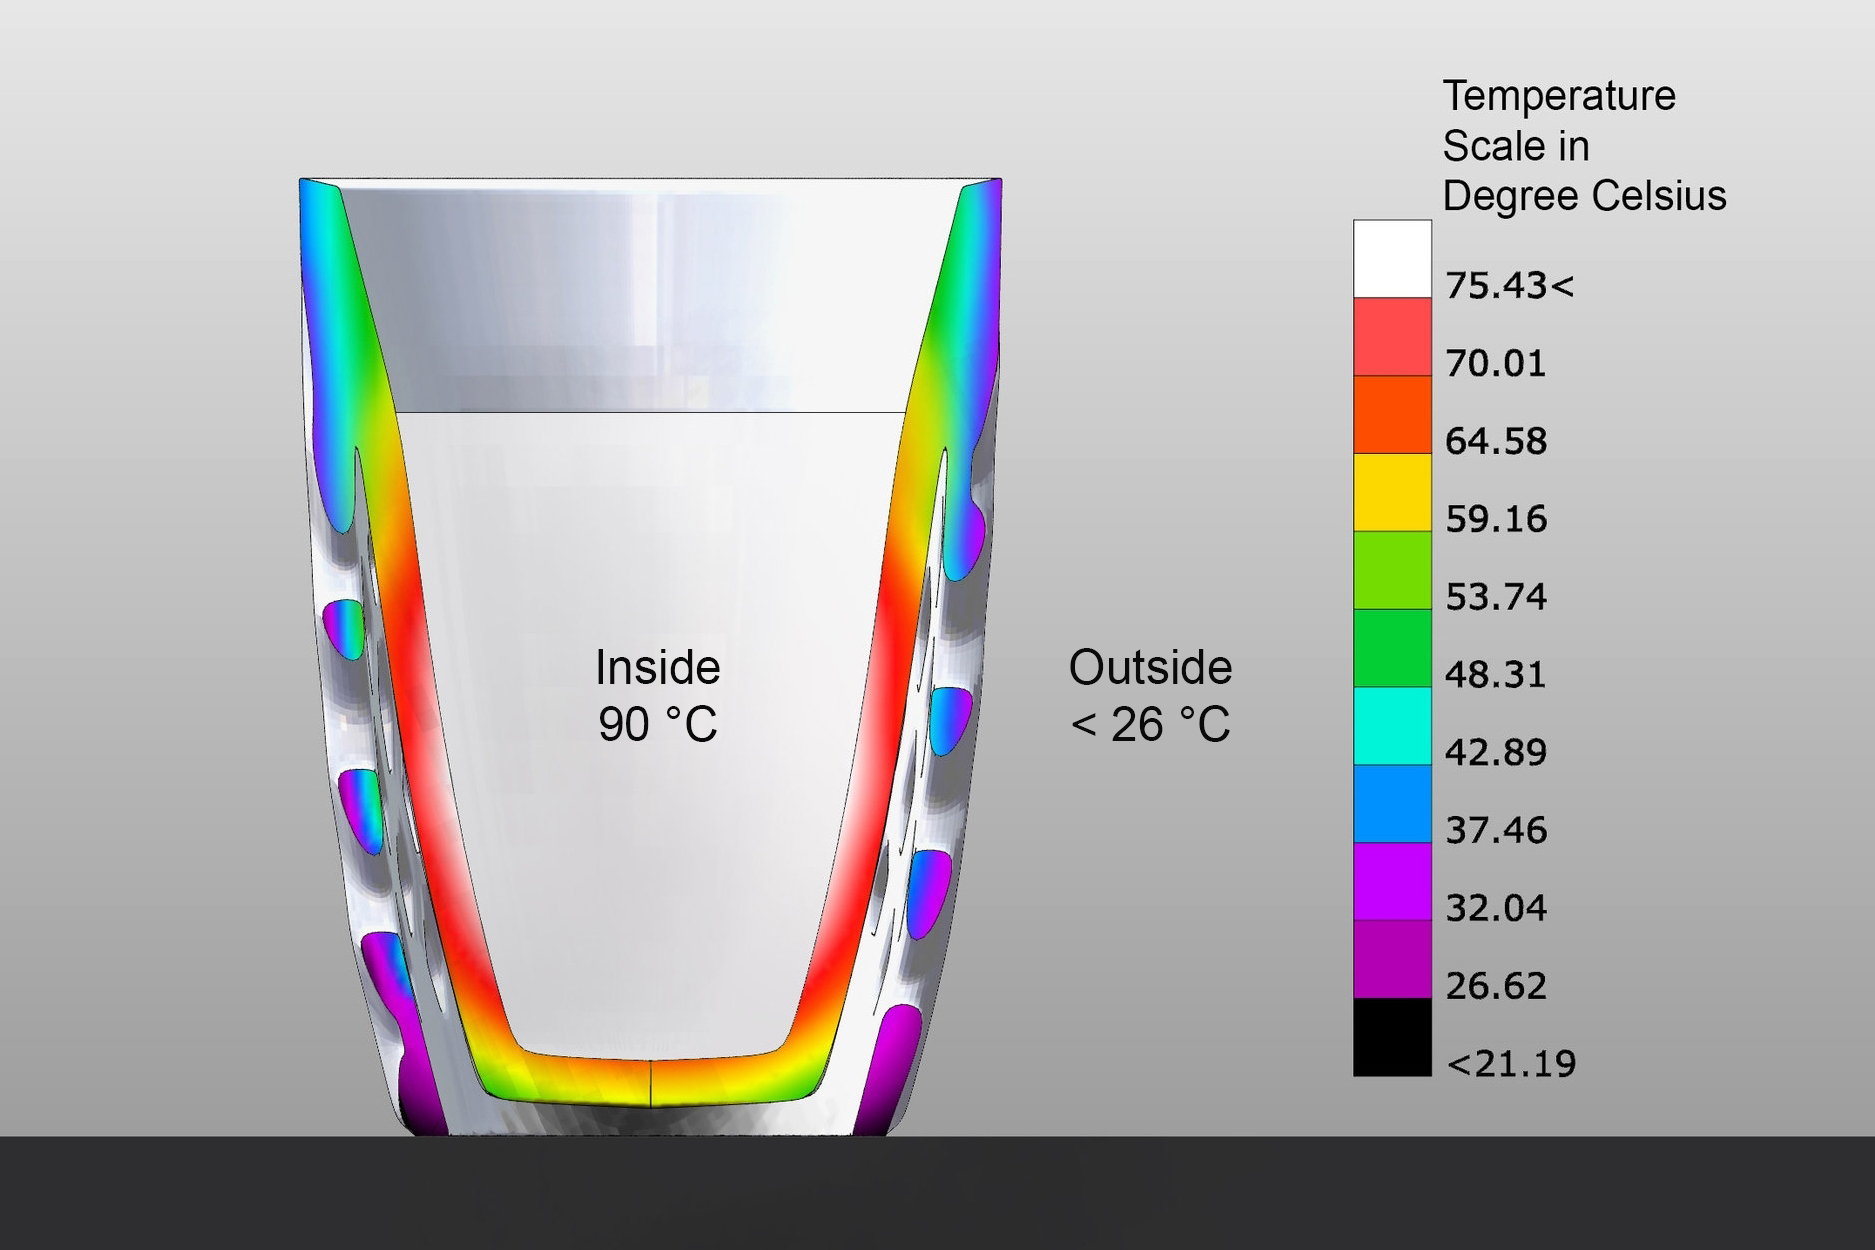 Thermal Transmittance Simulation for Porcelain filled with 90C hot liquid